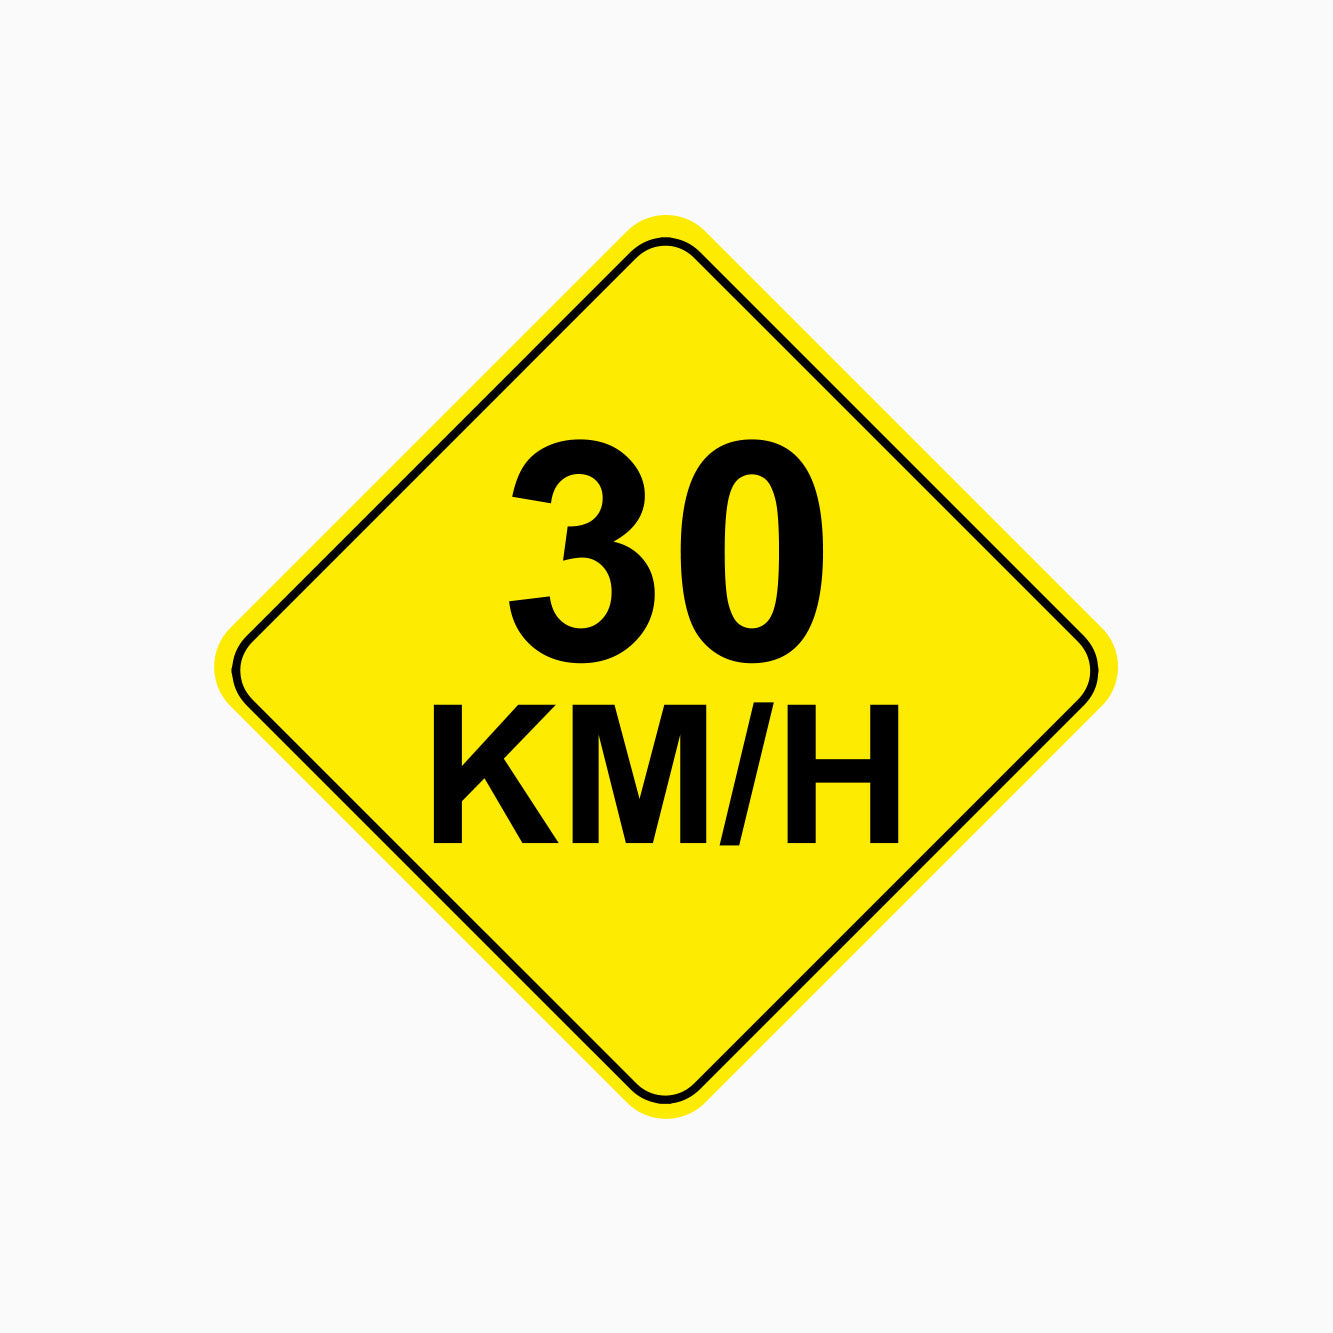 30Km/H SIGN (Yellow Diamond) - ROAD AND TRAFFIC SIGN IN AUSTRALIA